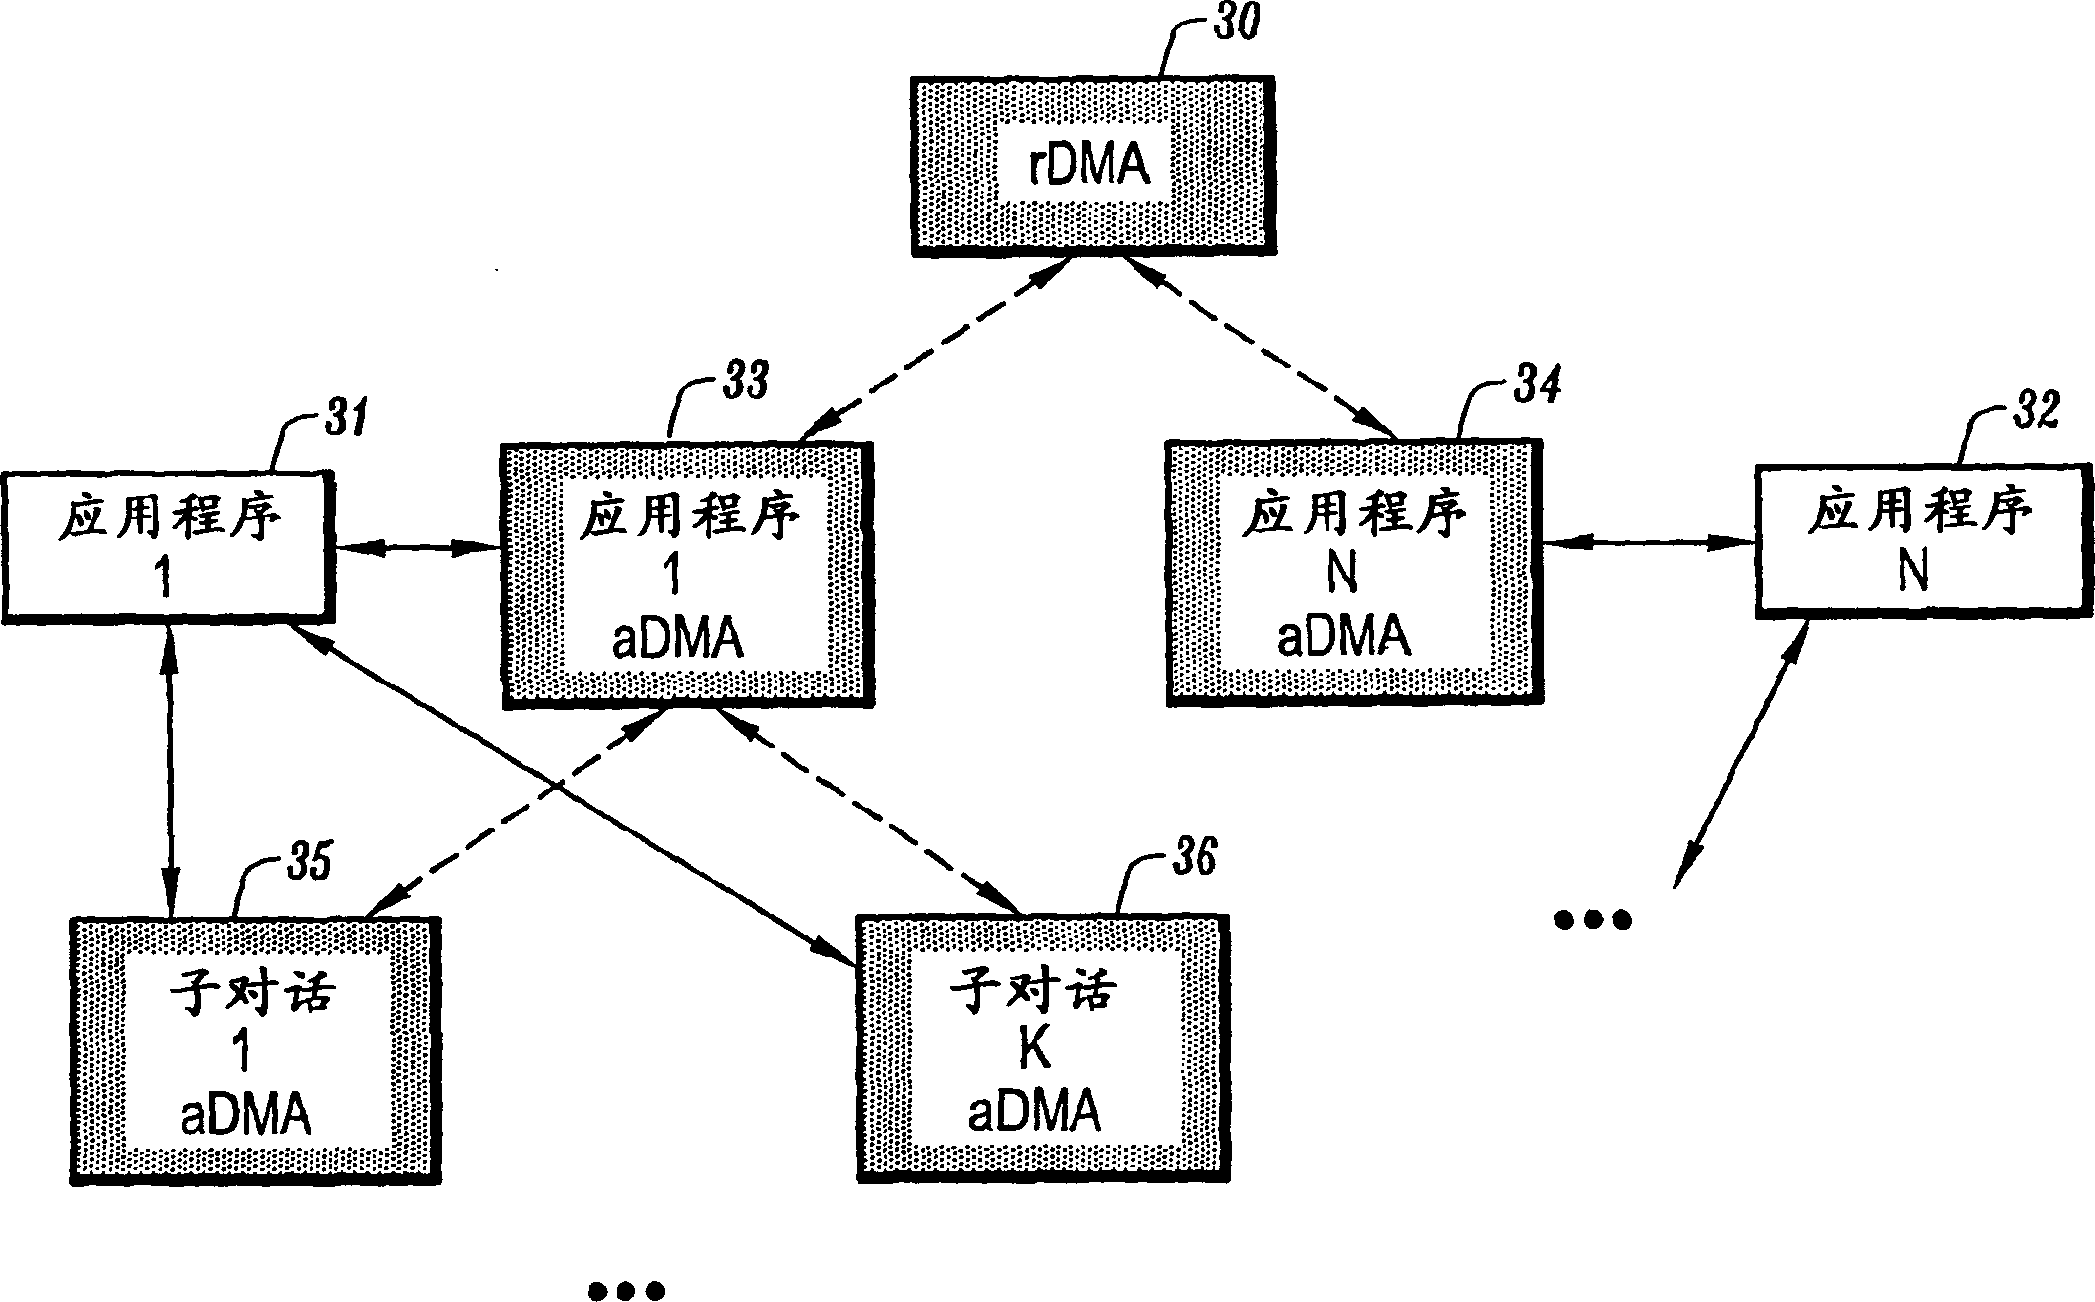 System and method for providing dialog management and arbitration in multi-modal environment